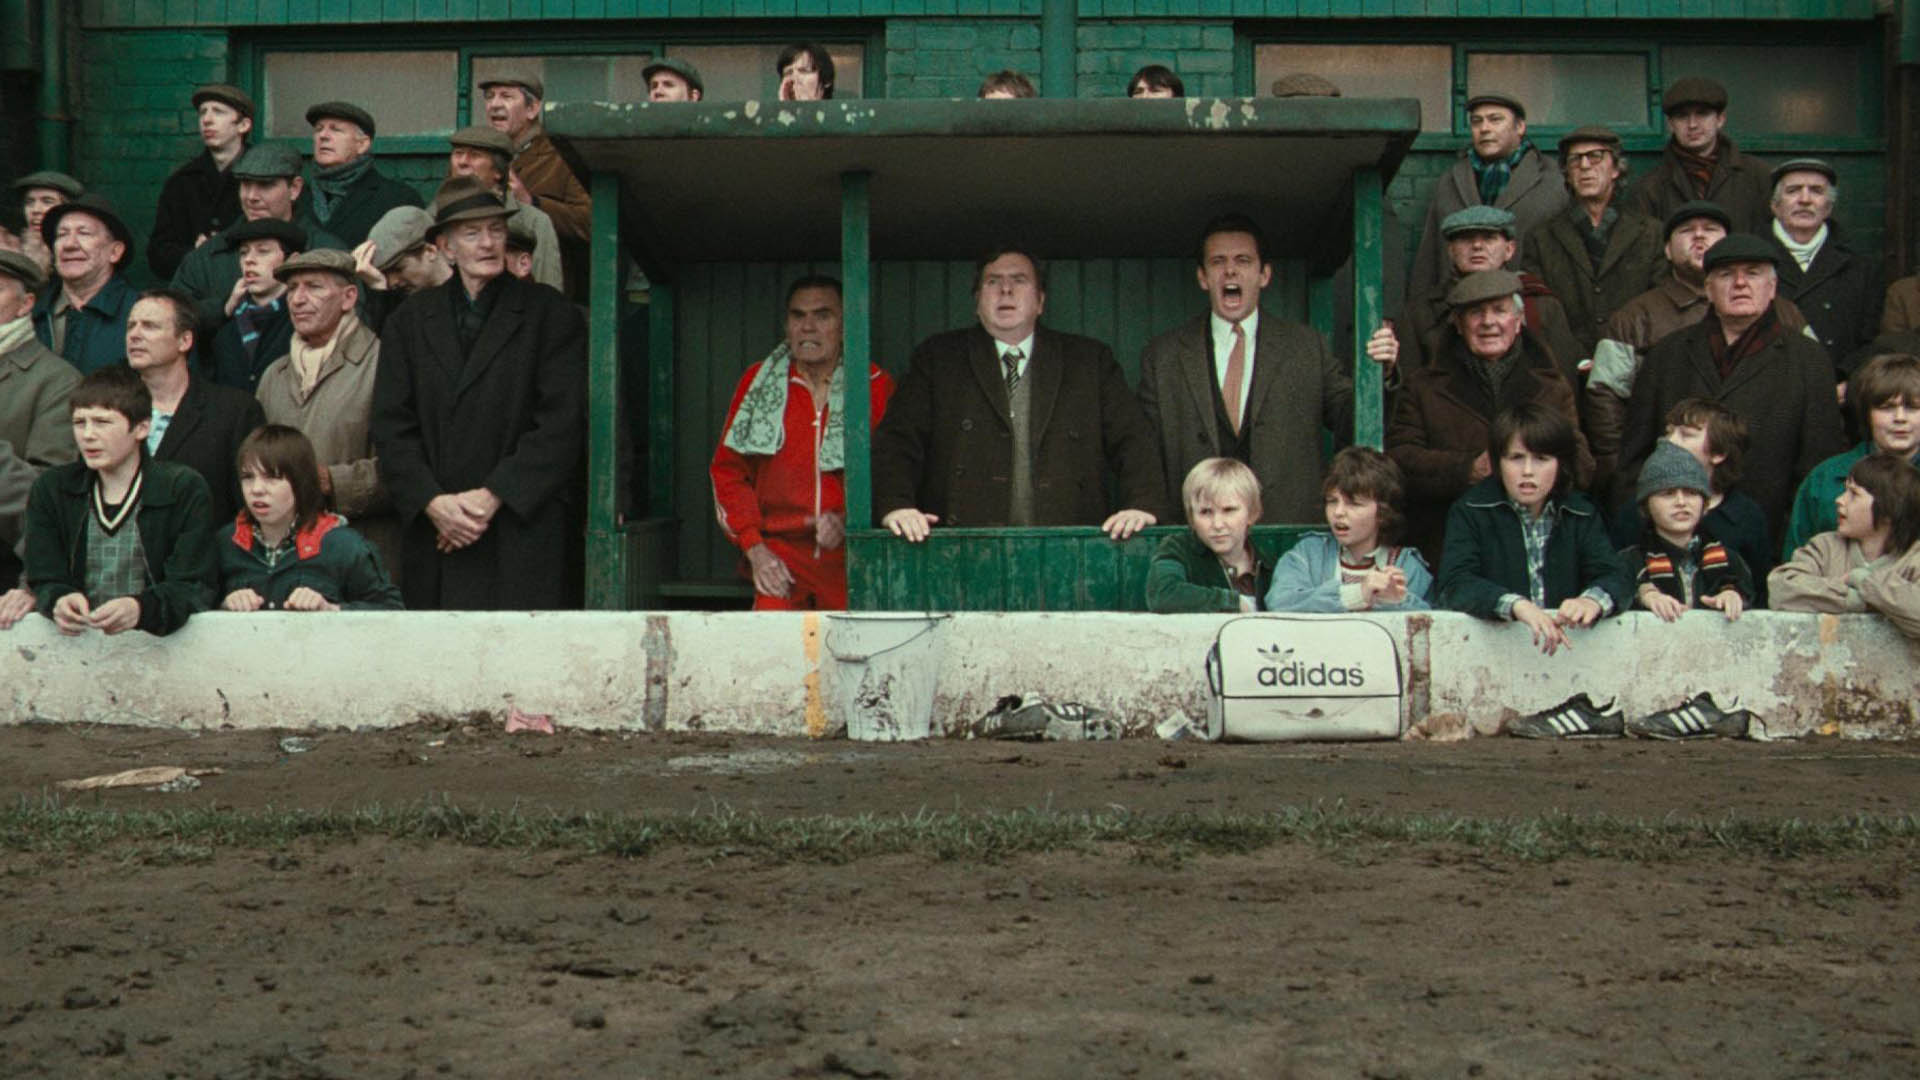 Brian Clough's character in The Damned United